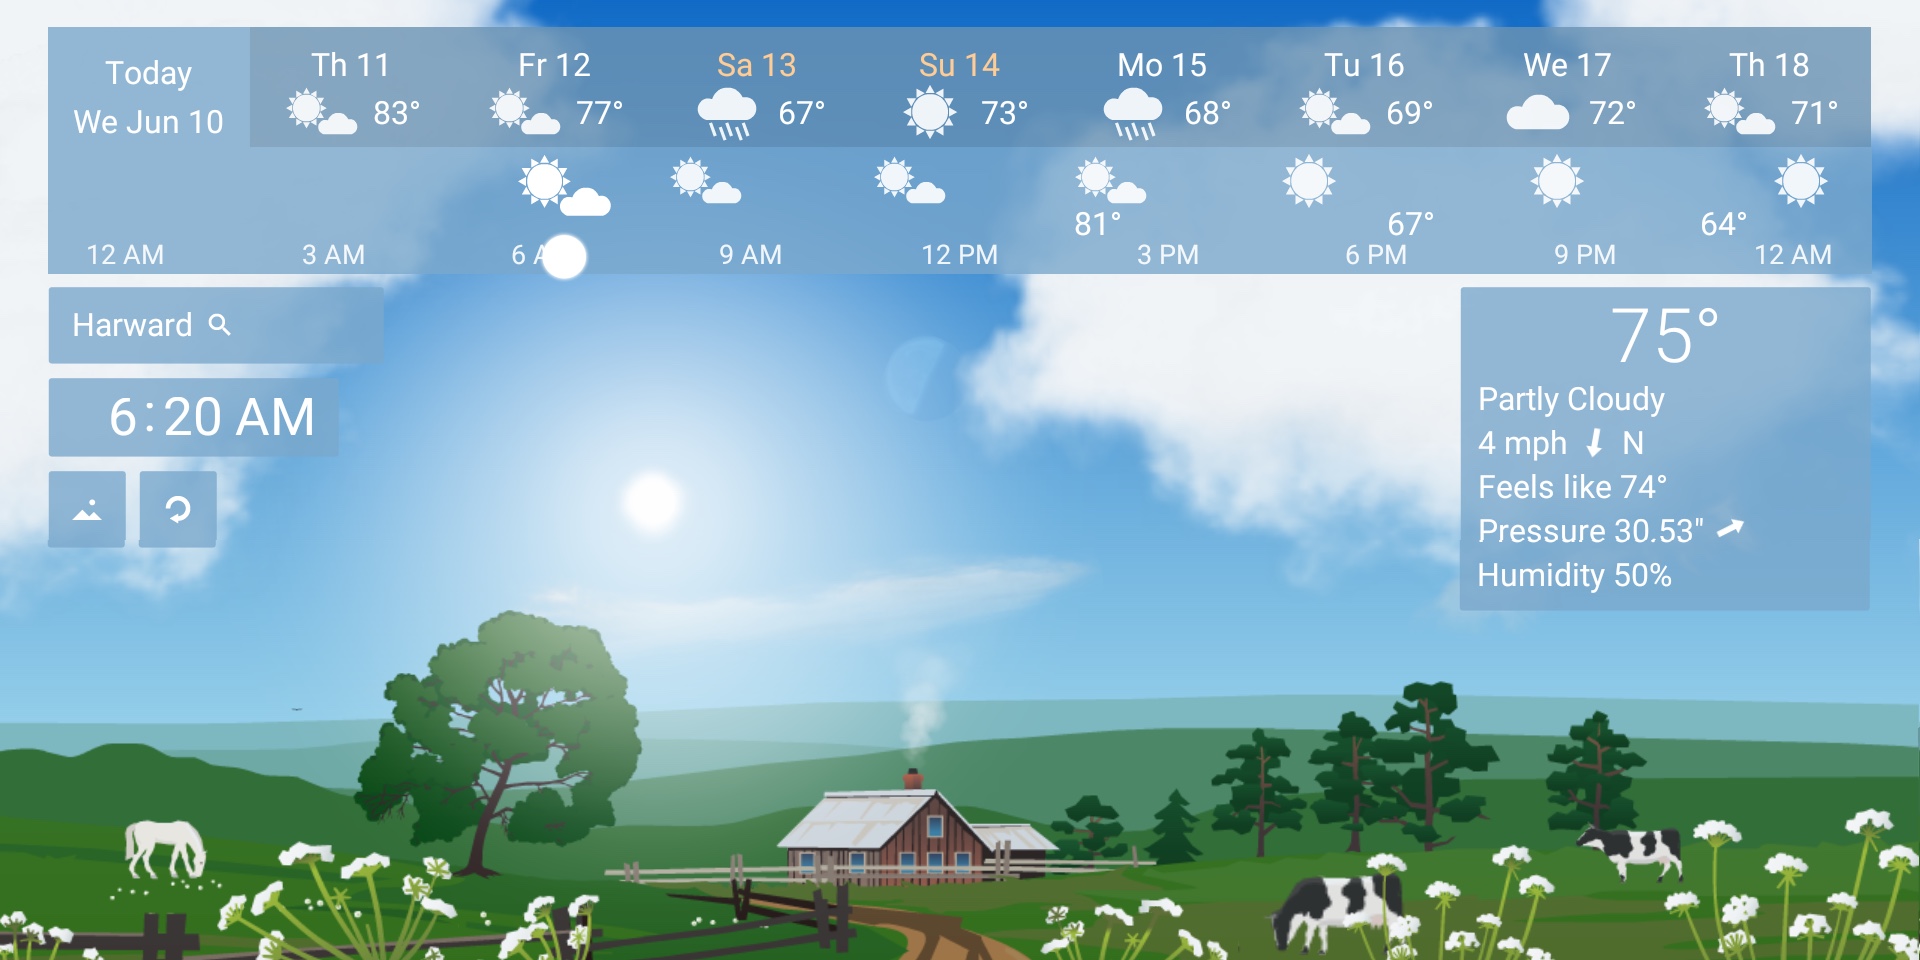 Animated YoWindow Weather app now FREE on iOS for a limited time (Reg. $3)